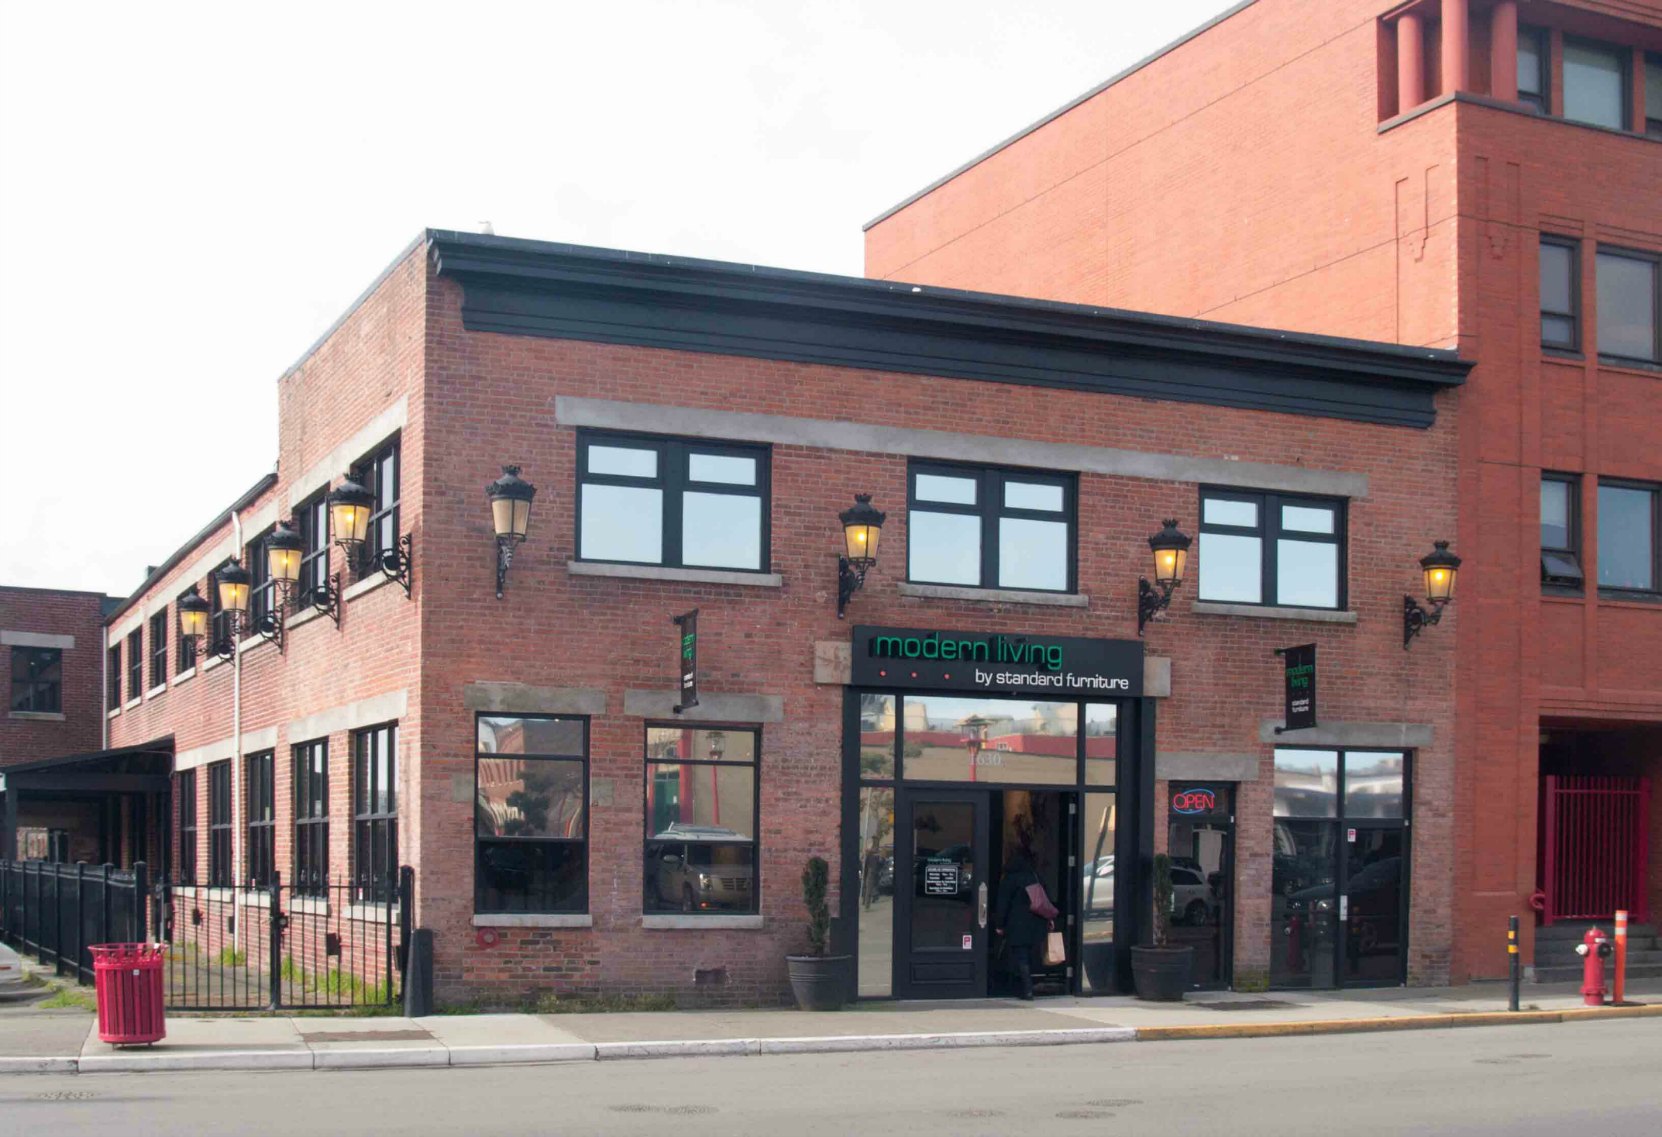 This building at 1630 Store Street was built in 1912 as a machine shop. In 2006 it was converted into retail space. (photo by Victoria Online Sightseeing Tours)